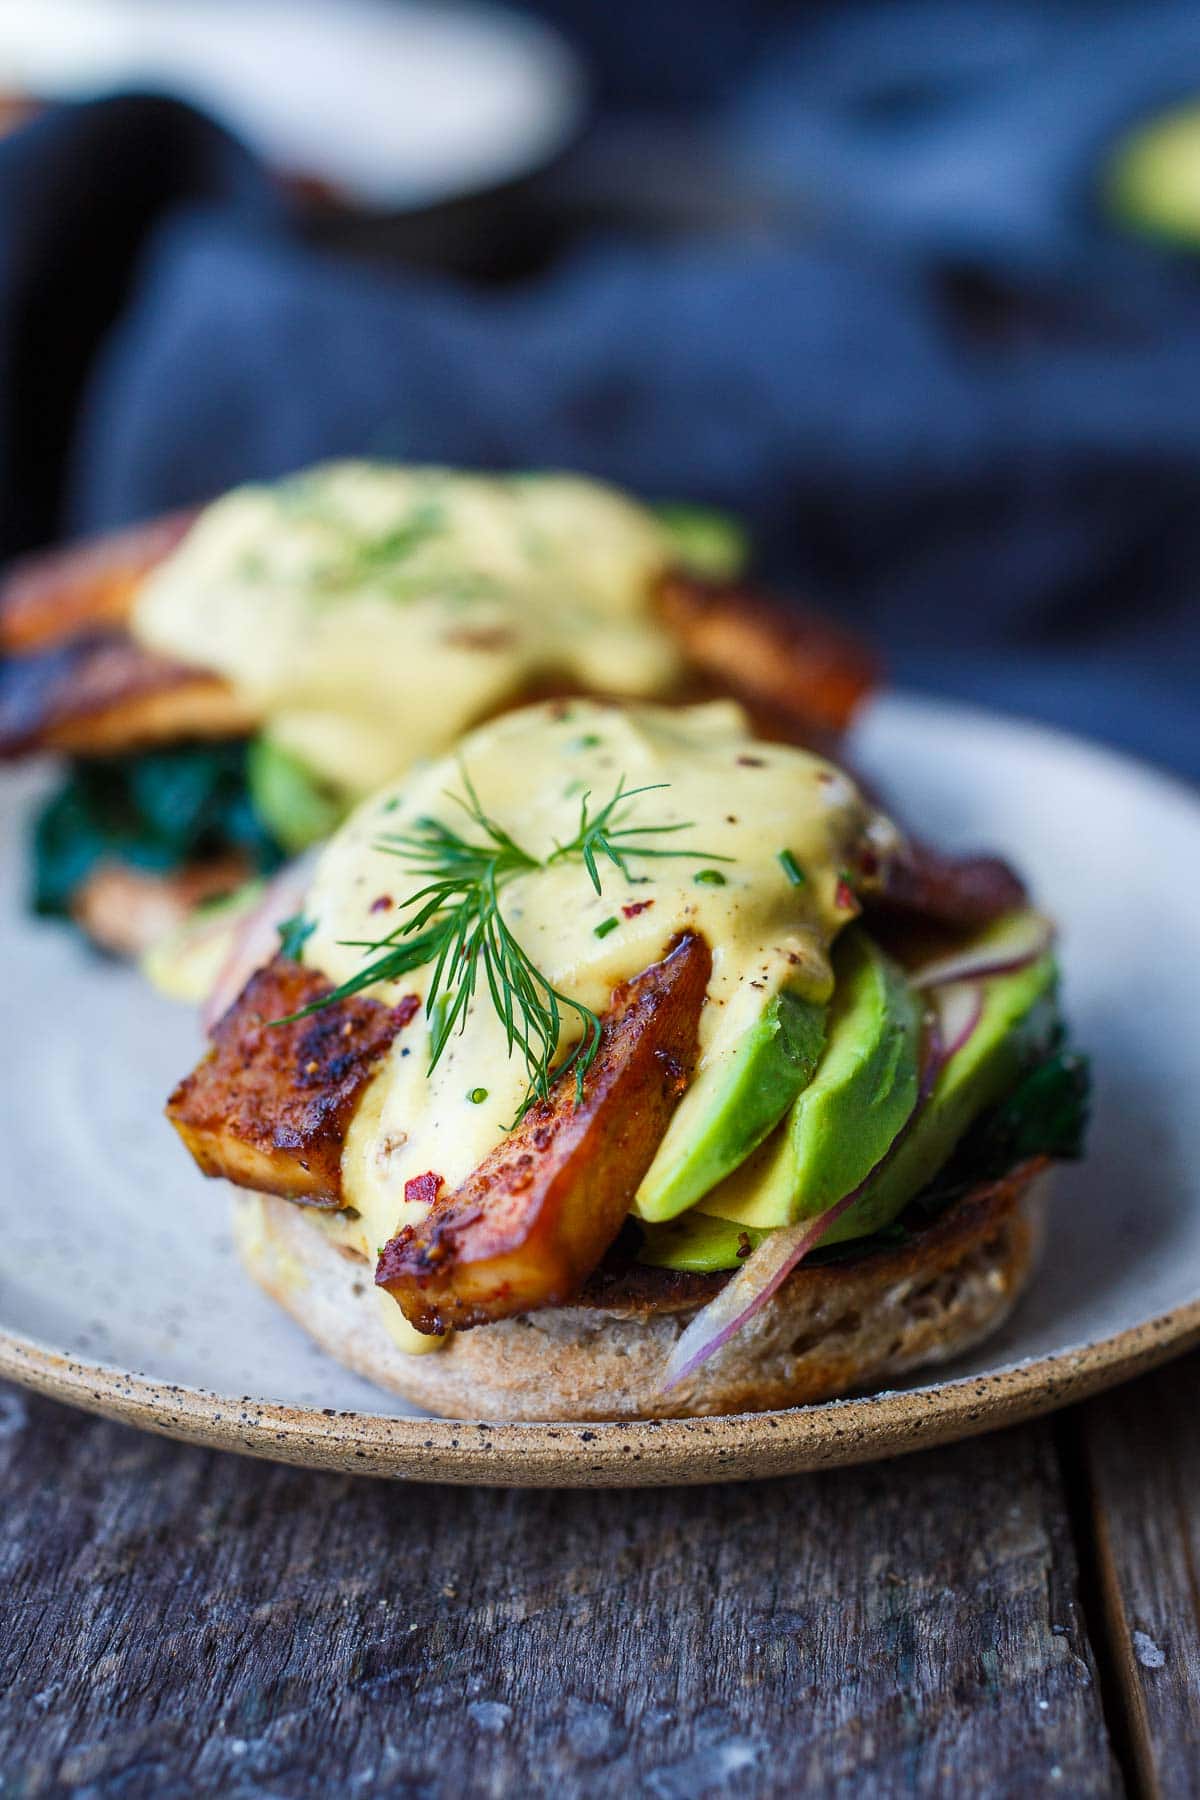 vegan eggs benedict with tofu bacon and vegan hollandaise sauce, made with avocado and red onion, garnished with dill.